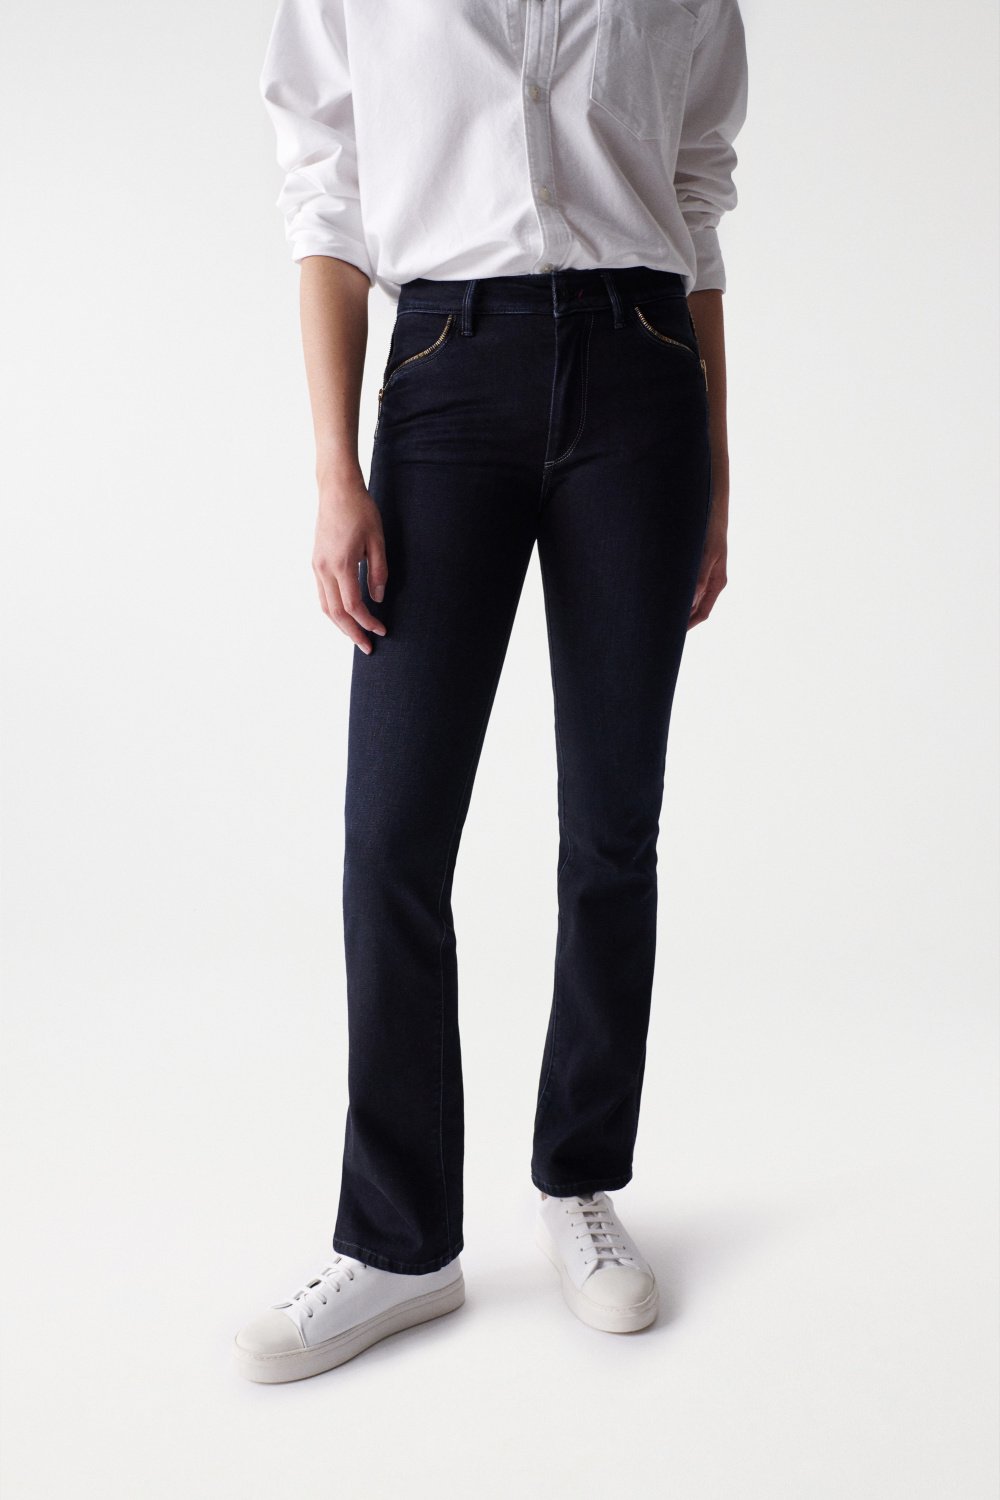 Push Up Destiny Bootcut Jeans with details on the pockets - Salsa